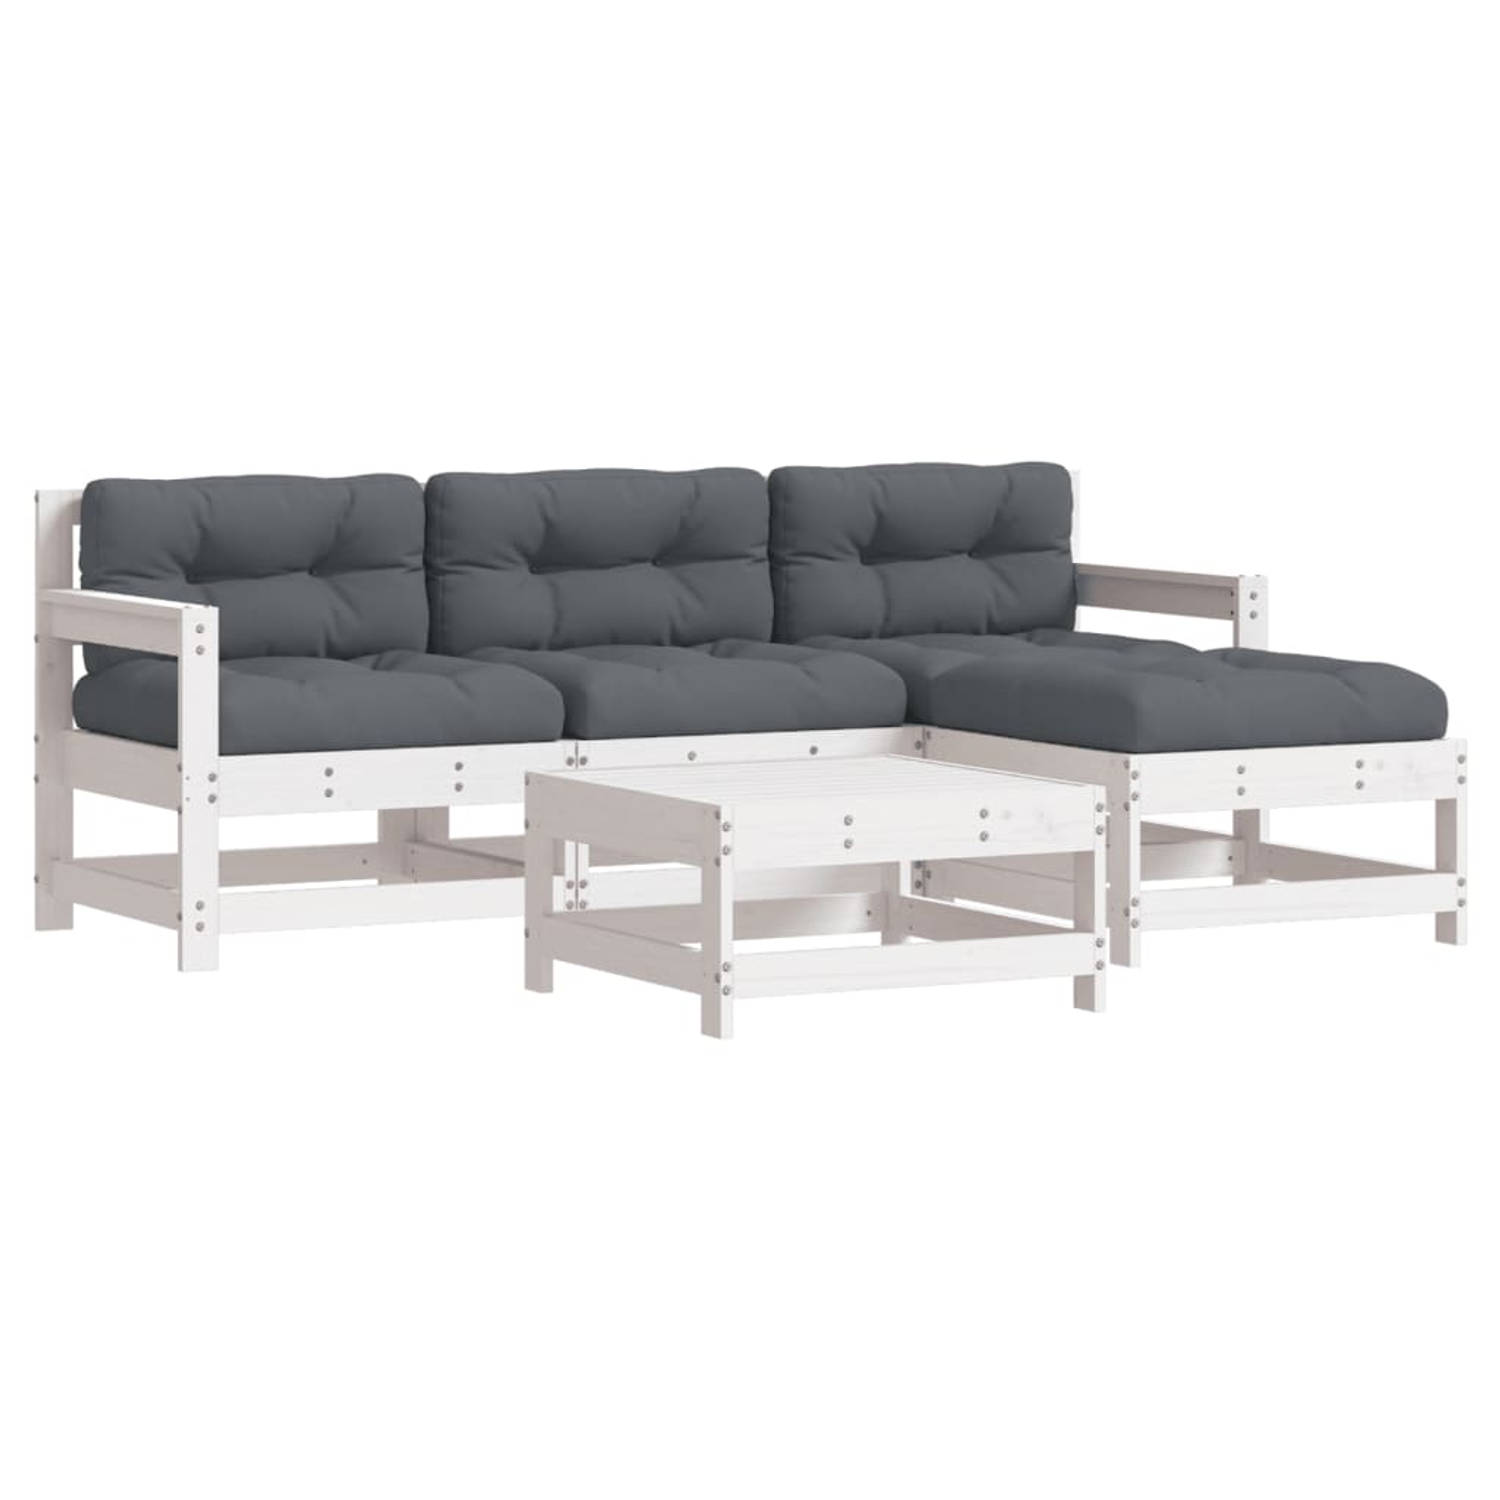 The Living Store 5-delige Loungeset met kussens massief hout wit - Tuinset